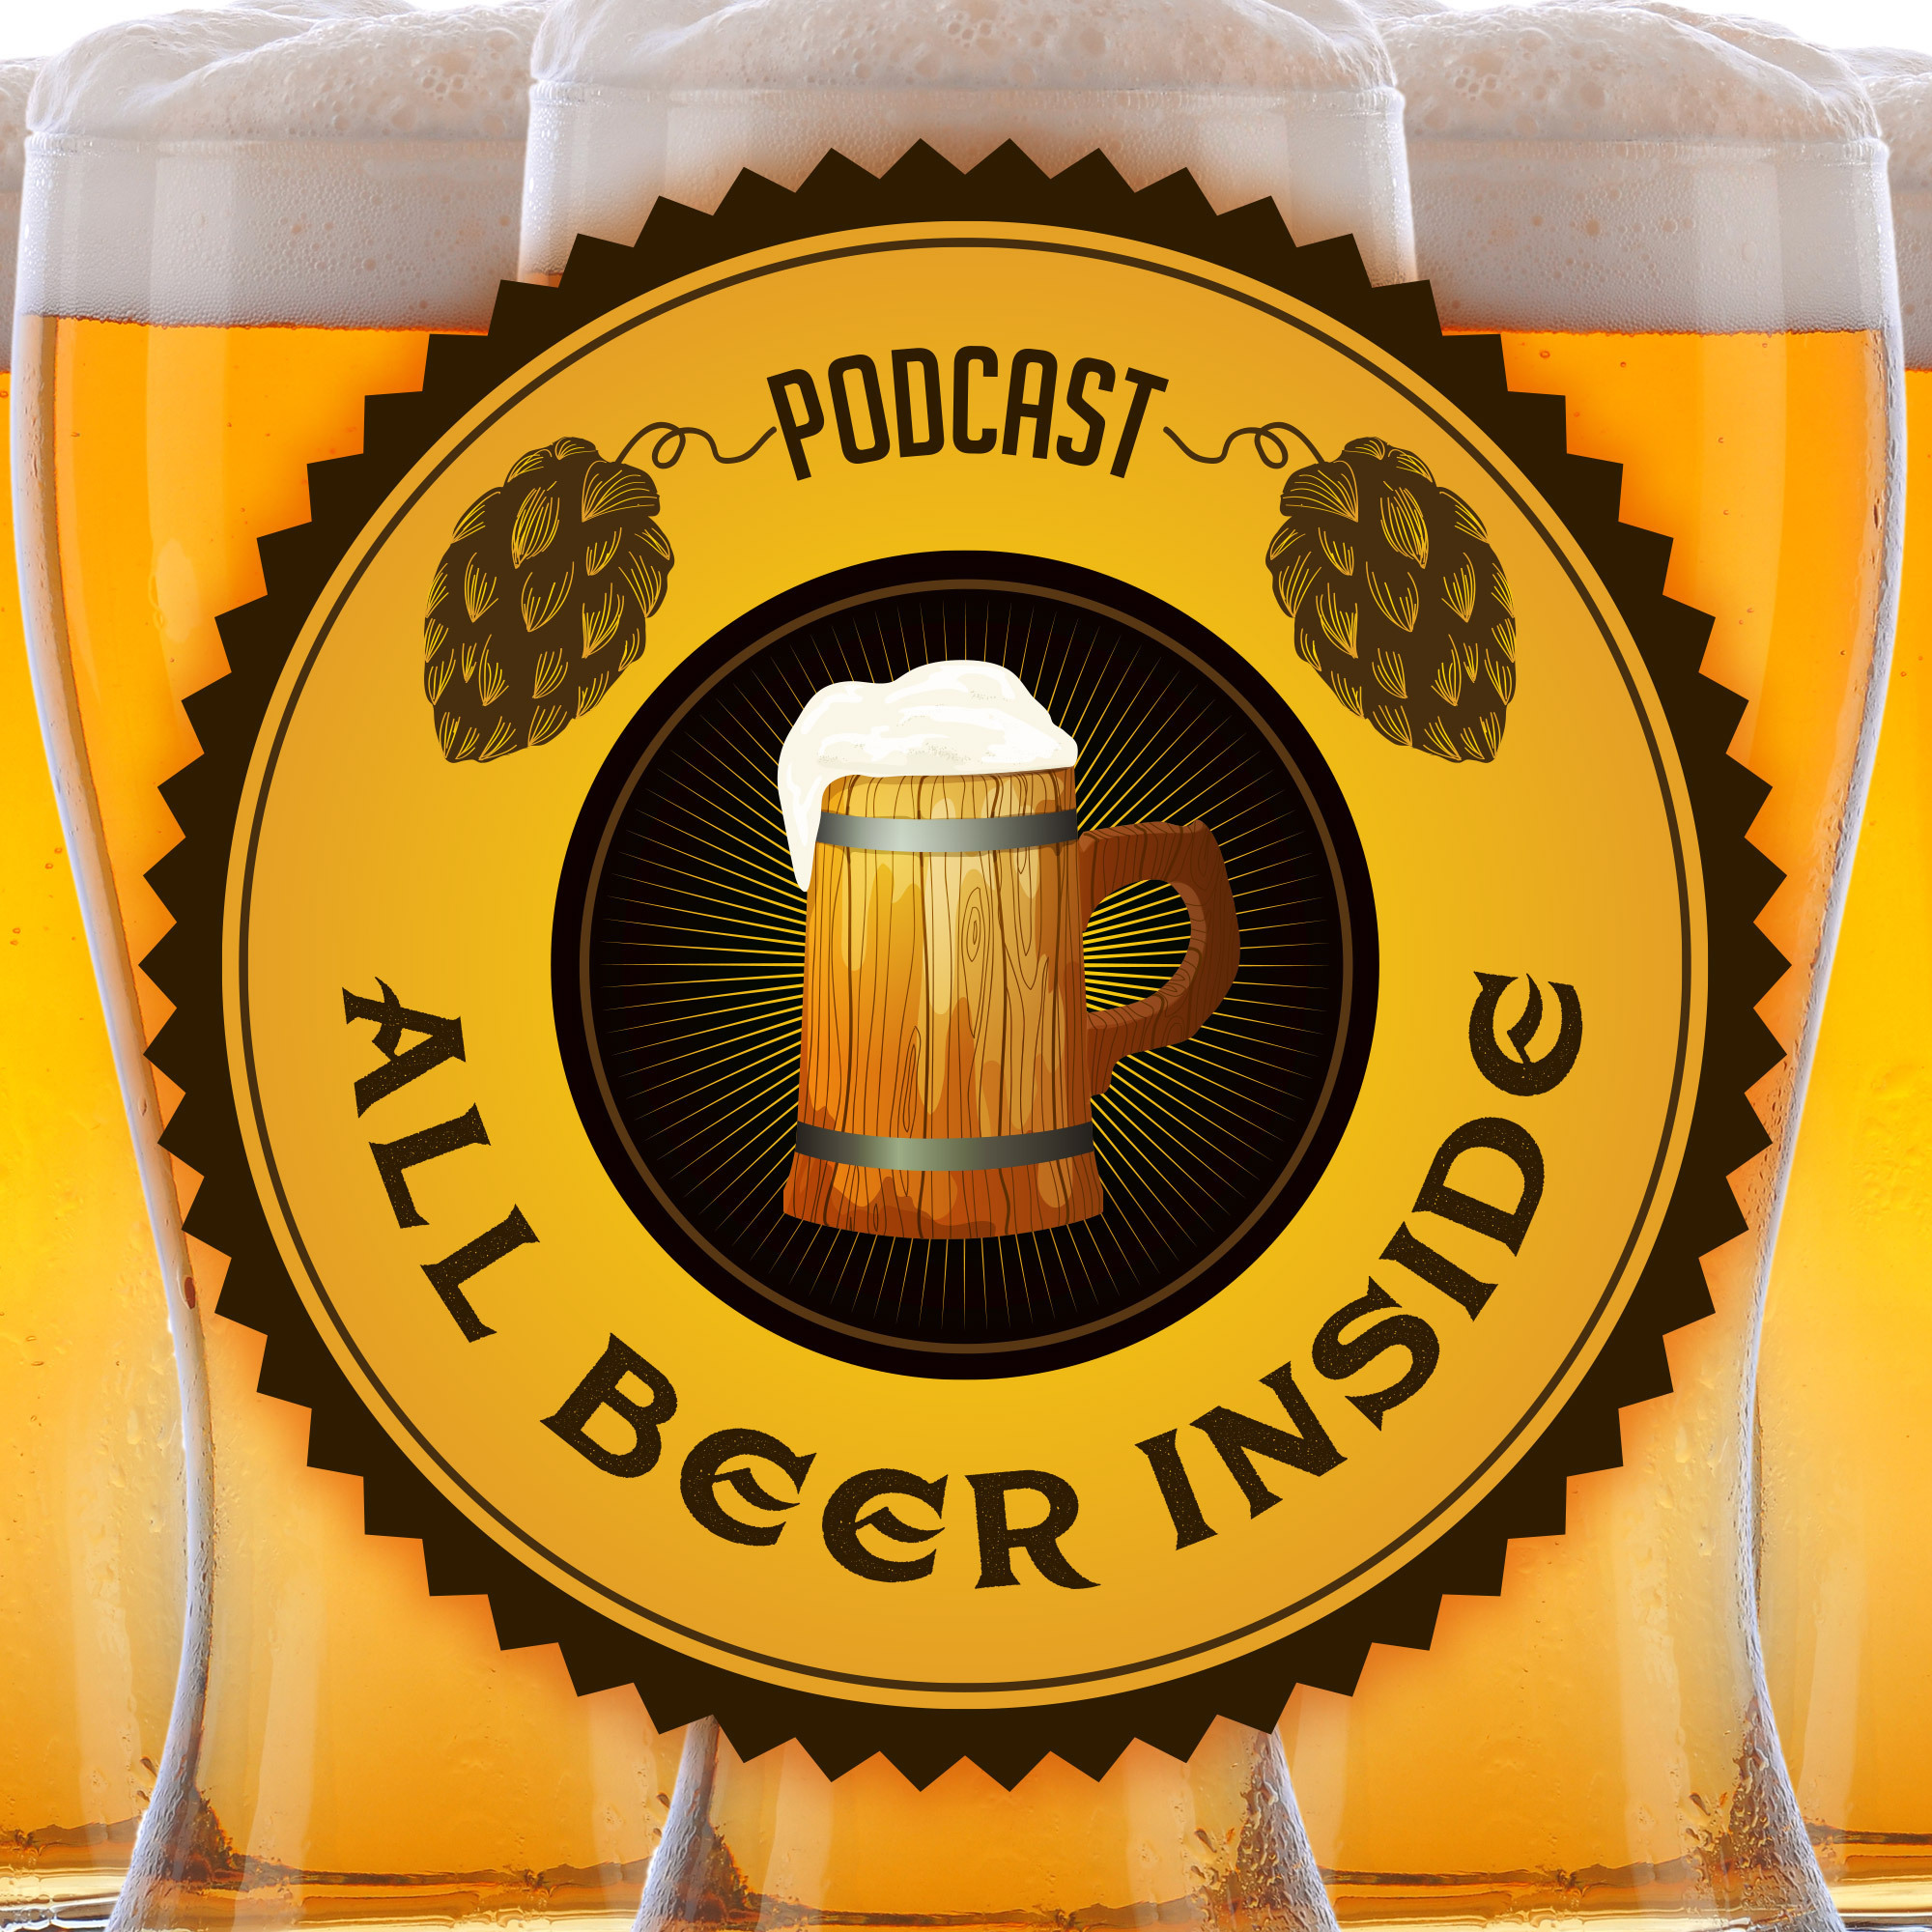 All Beer Inside Episode 36 Part 1 - Did you clear your throat after your dates?